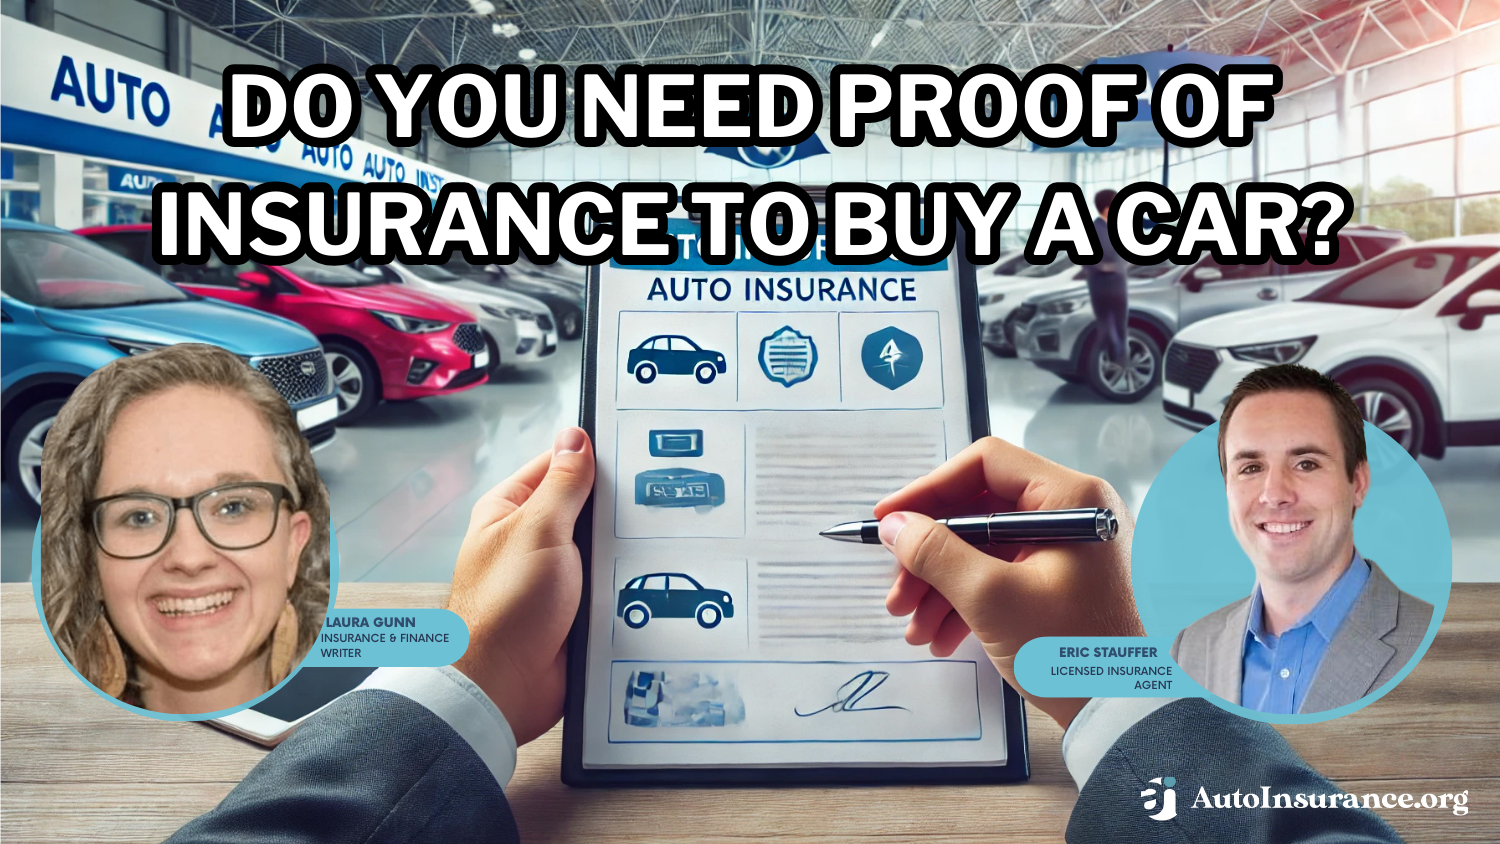 Do you need proof of insurance to buy a car?